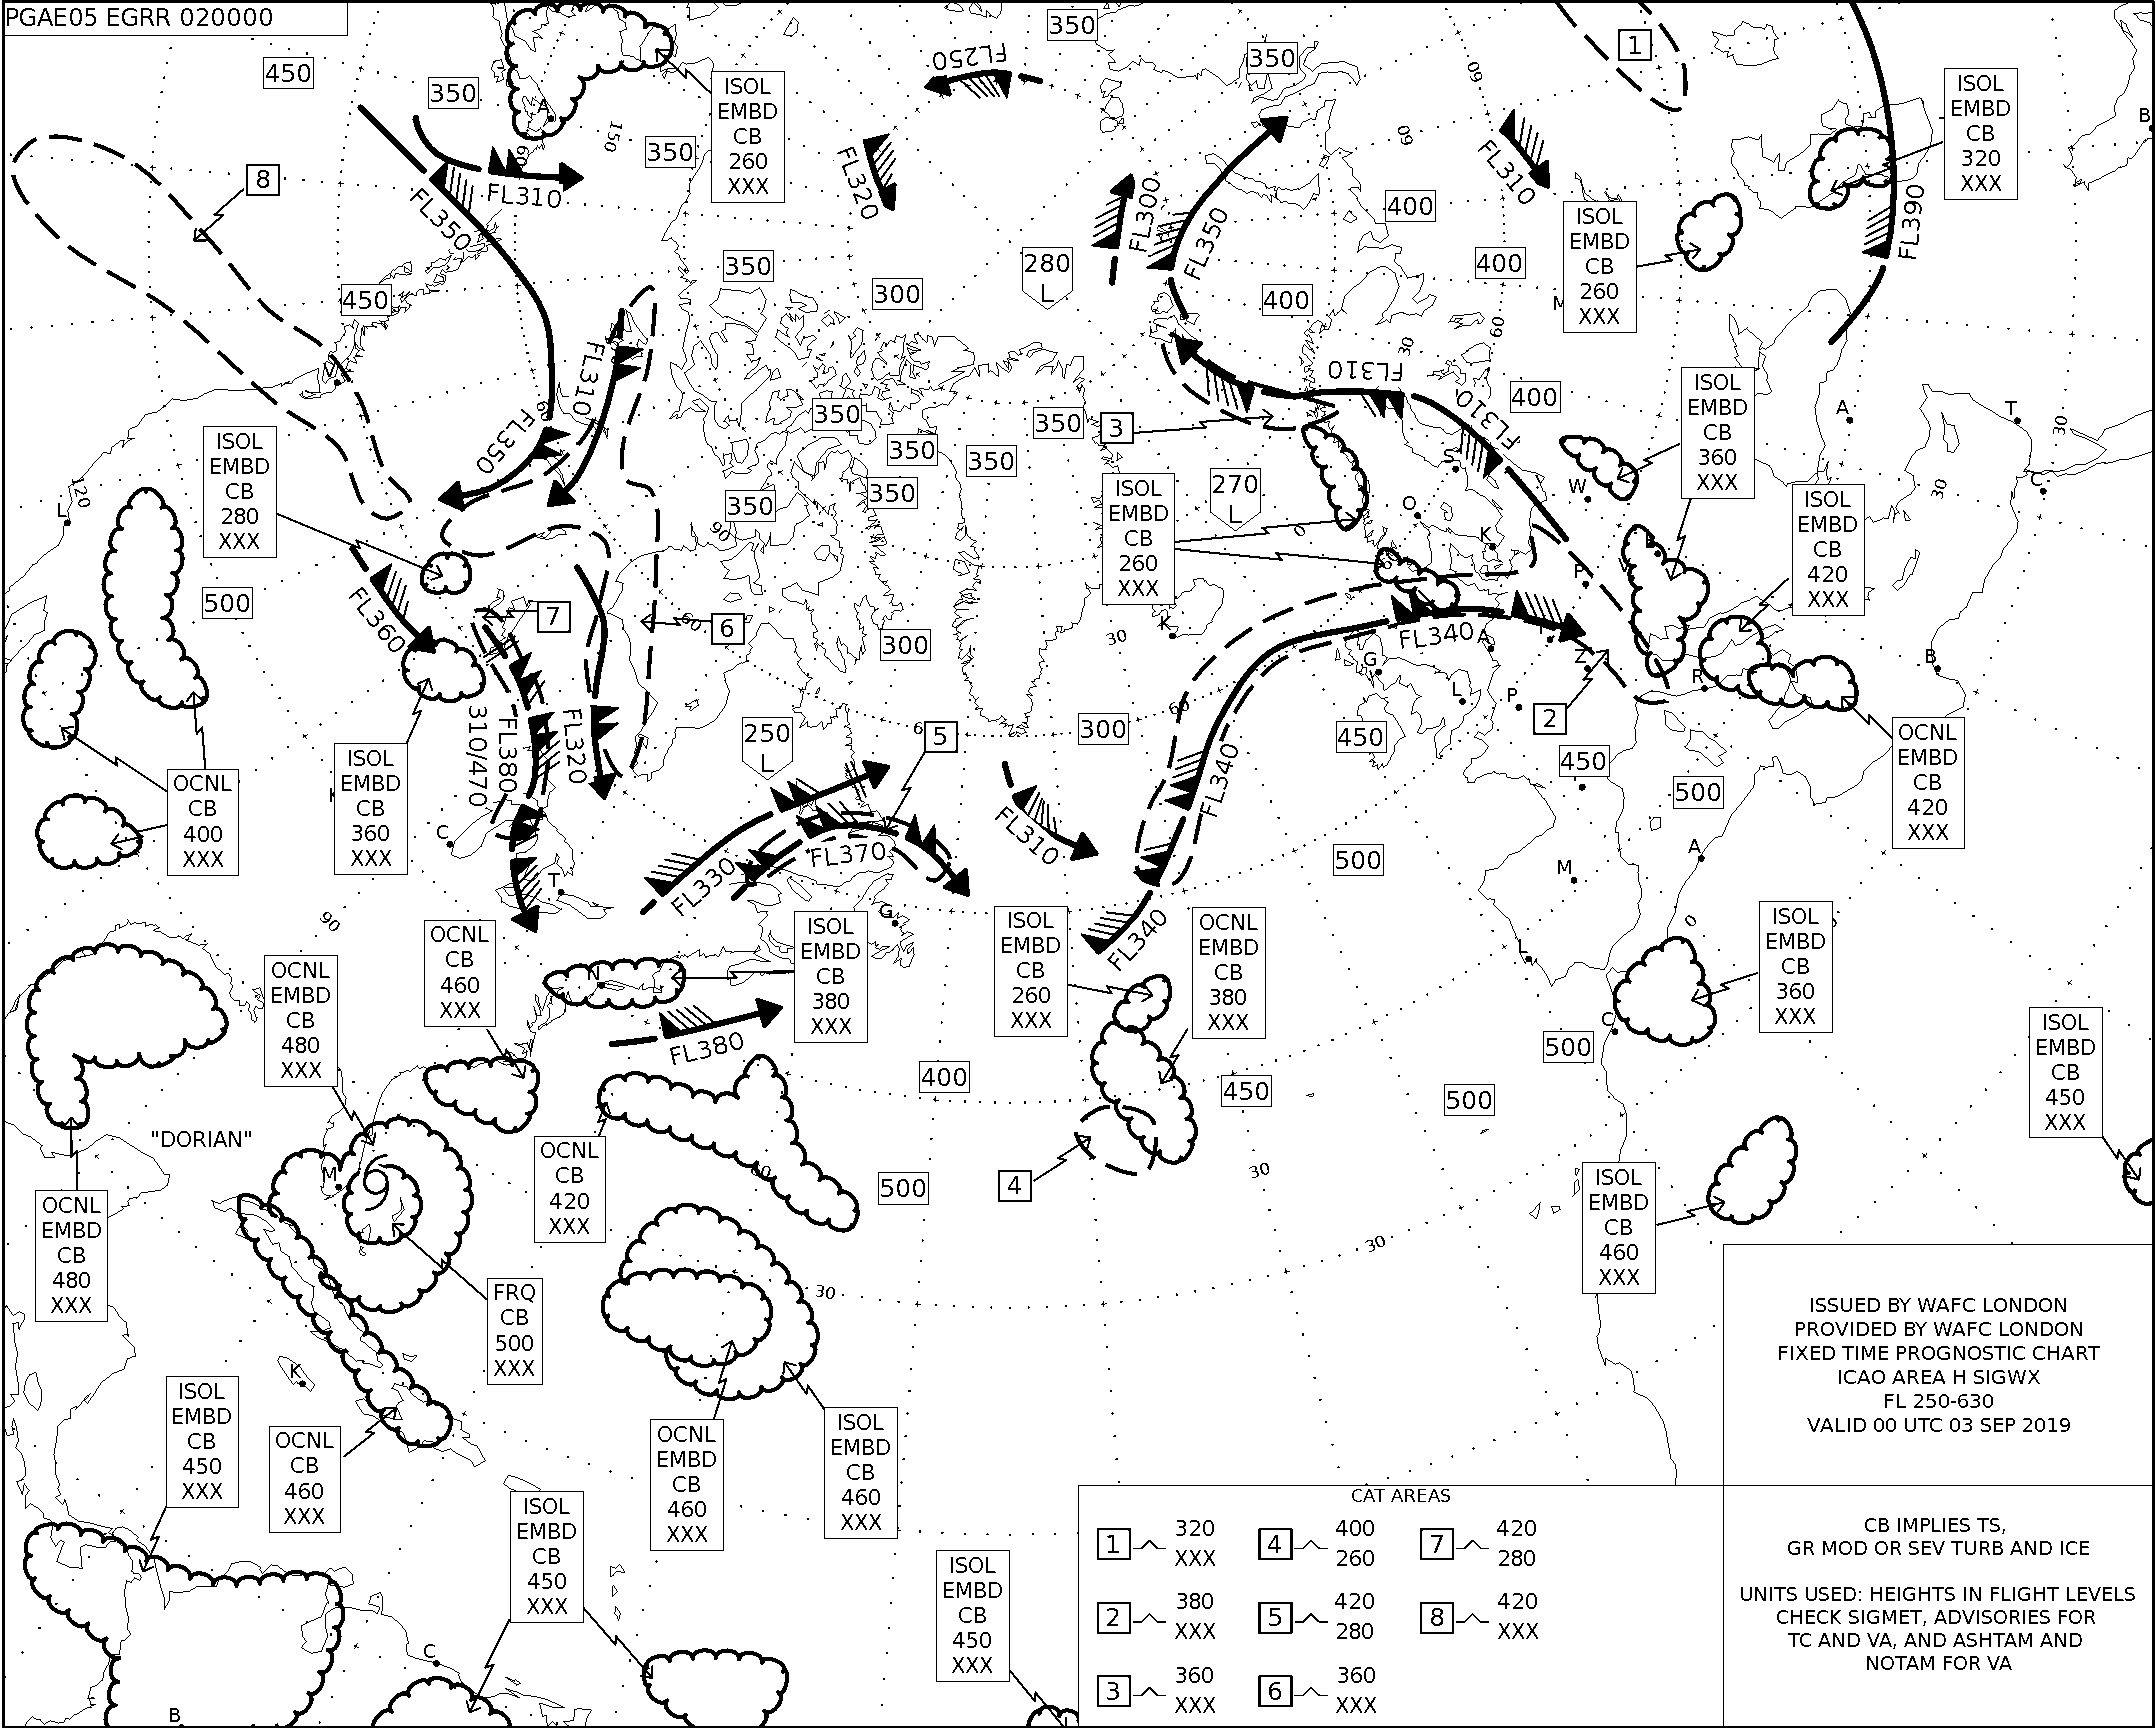 an example of a SIGWX chart